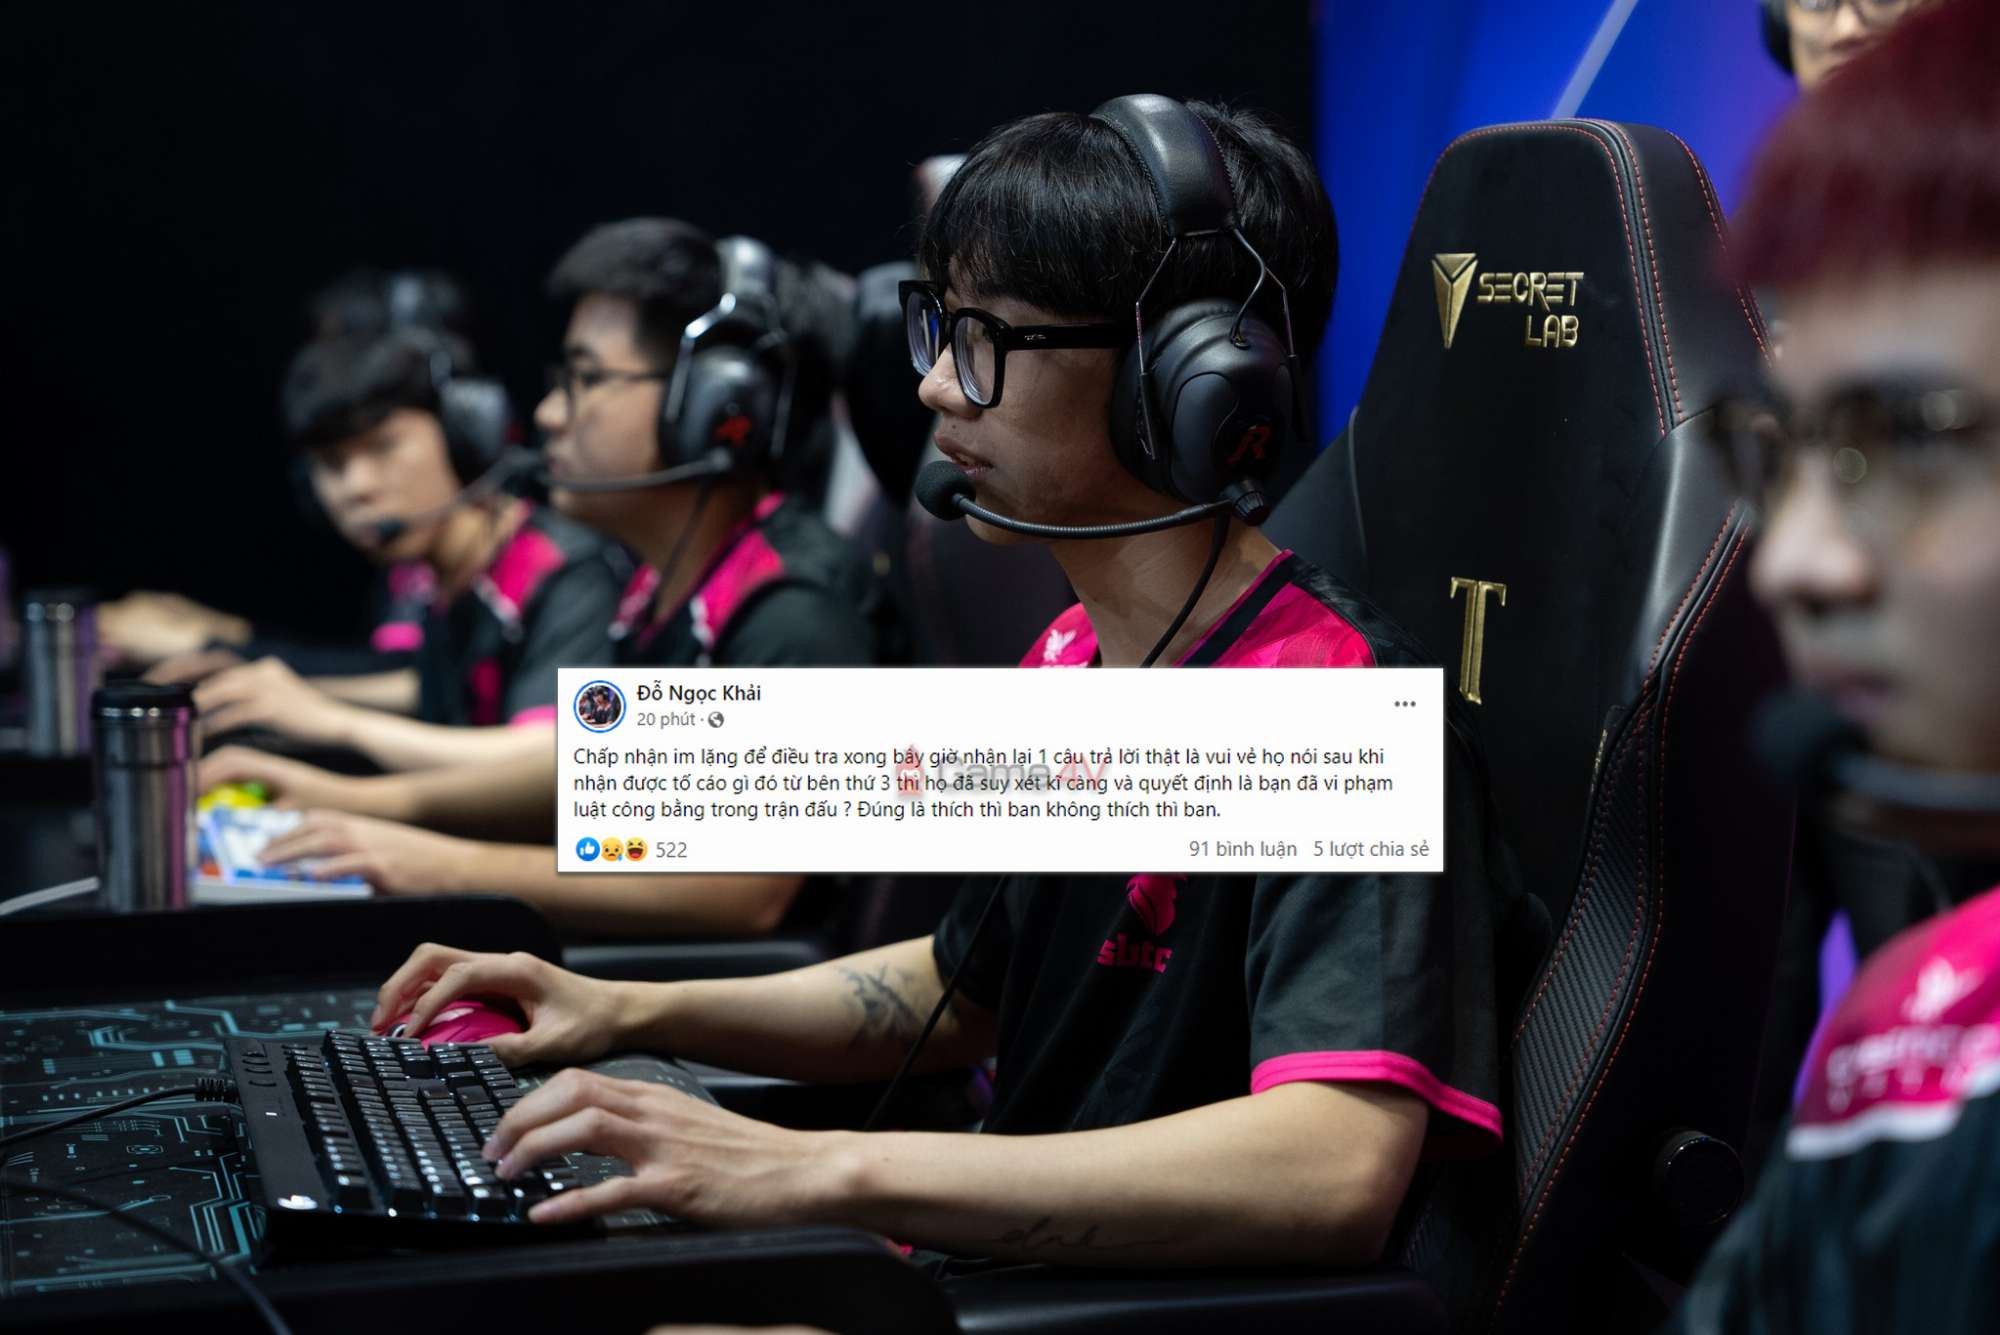 DNK spoke out about the punishment that Riot Games gave him.